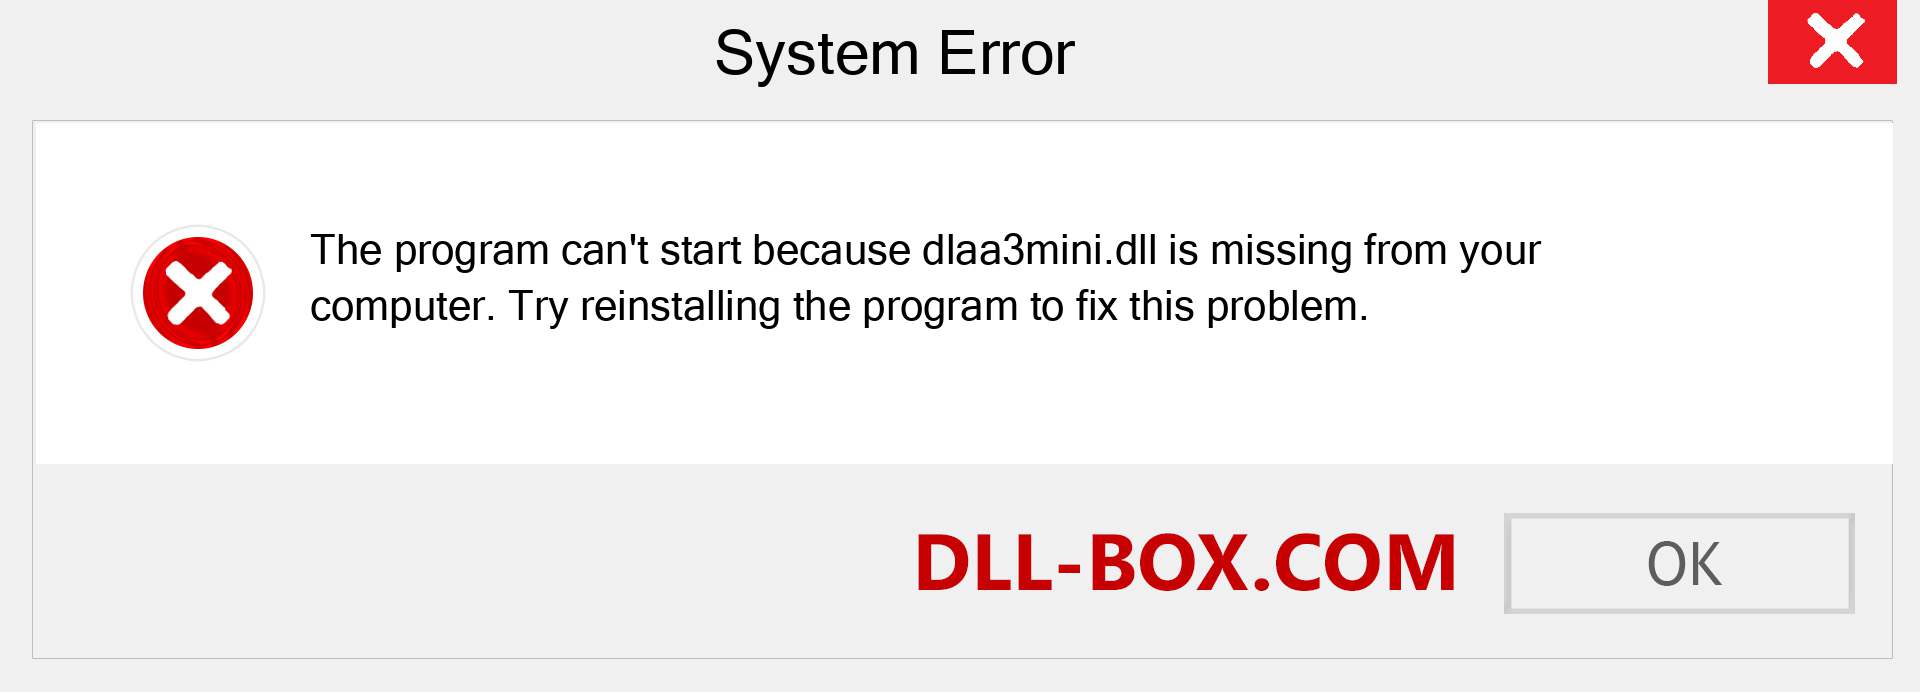  dlaa3mini.dll file is missing?. Download for Windows 7, 8, 10 - Fix  dlaa3mini dll Missing Error on Windows, photos, images